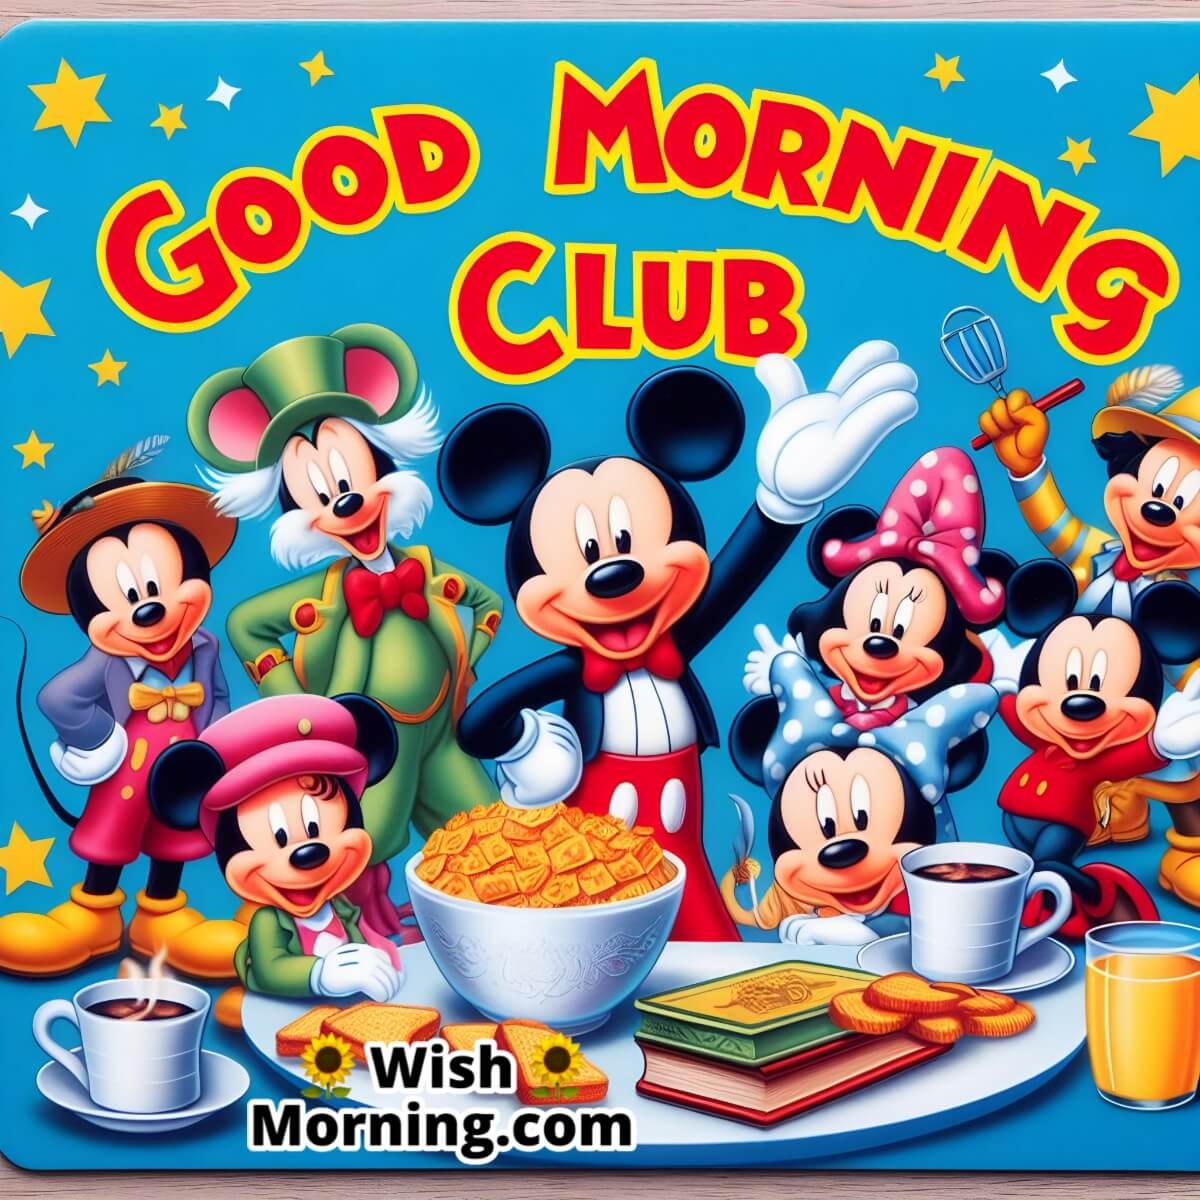 Good Morning Mickey Mouse Club